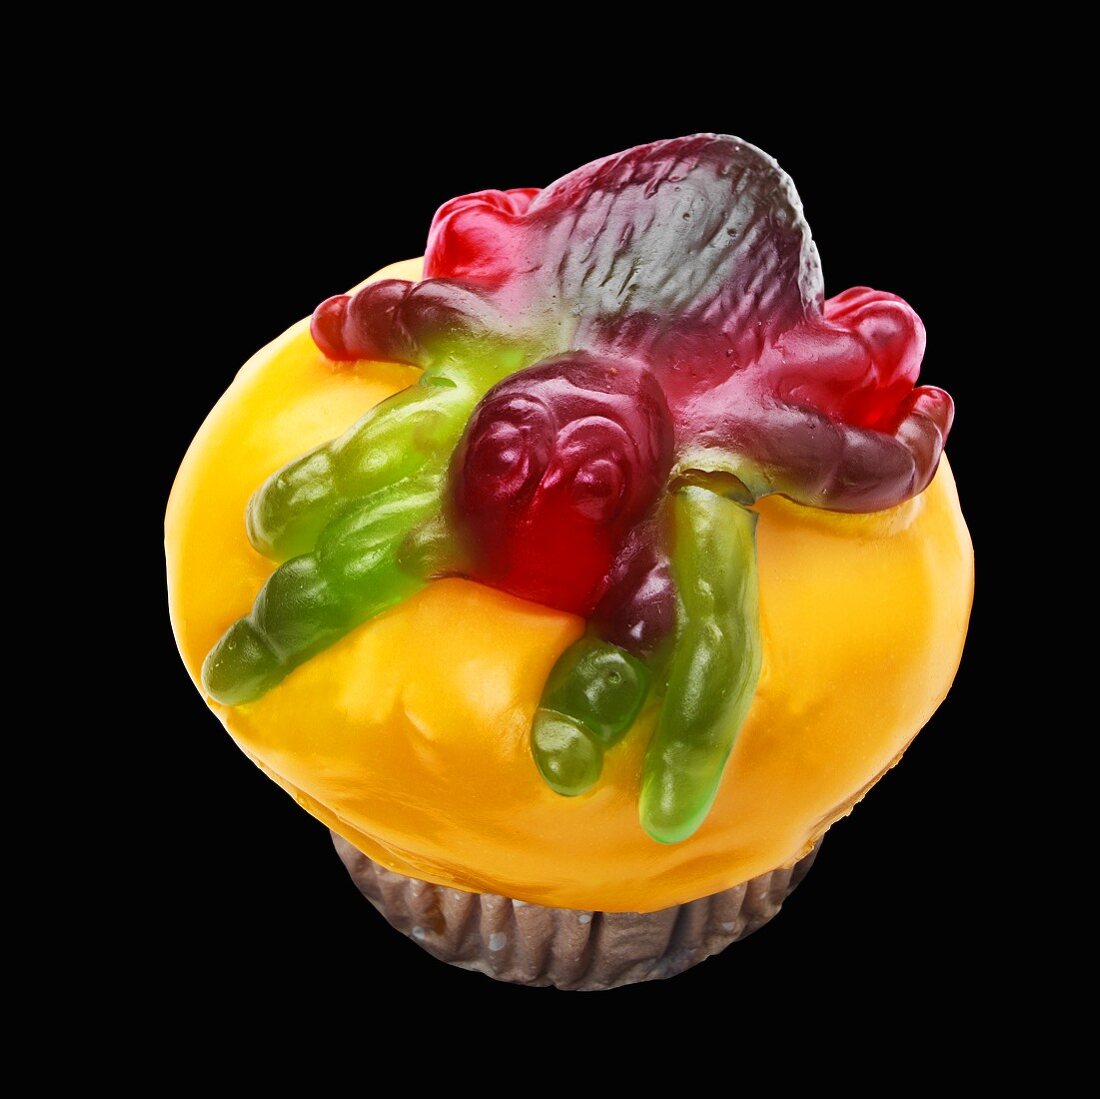 Cupcake with jelly spider for Halloween